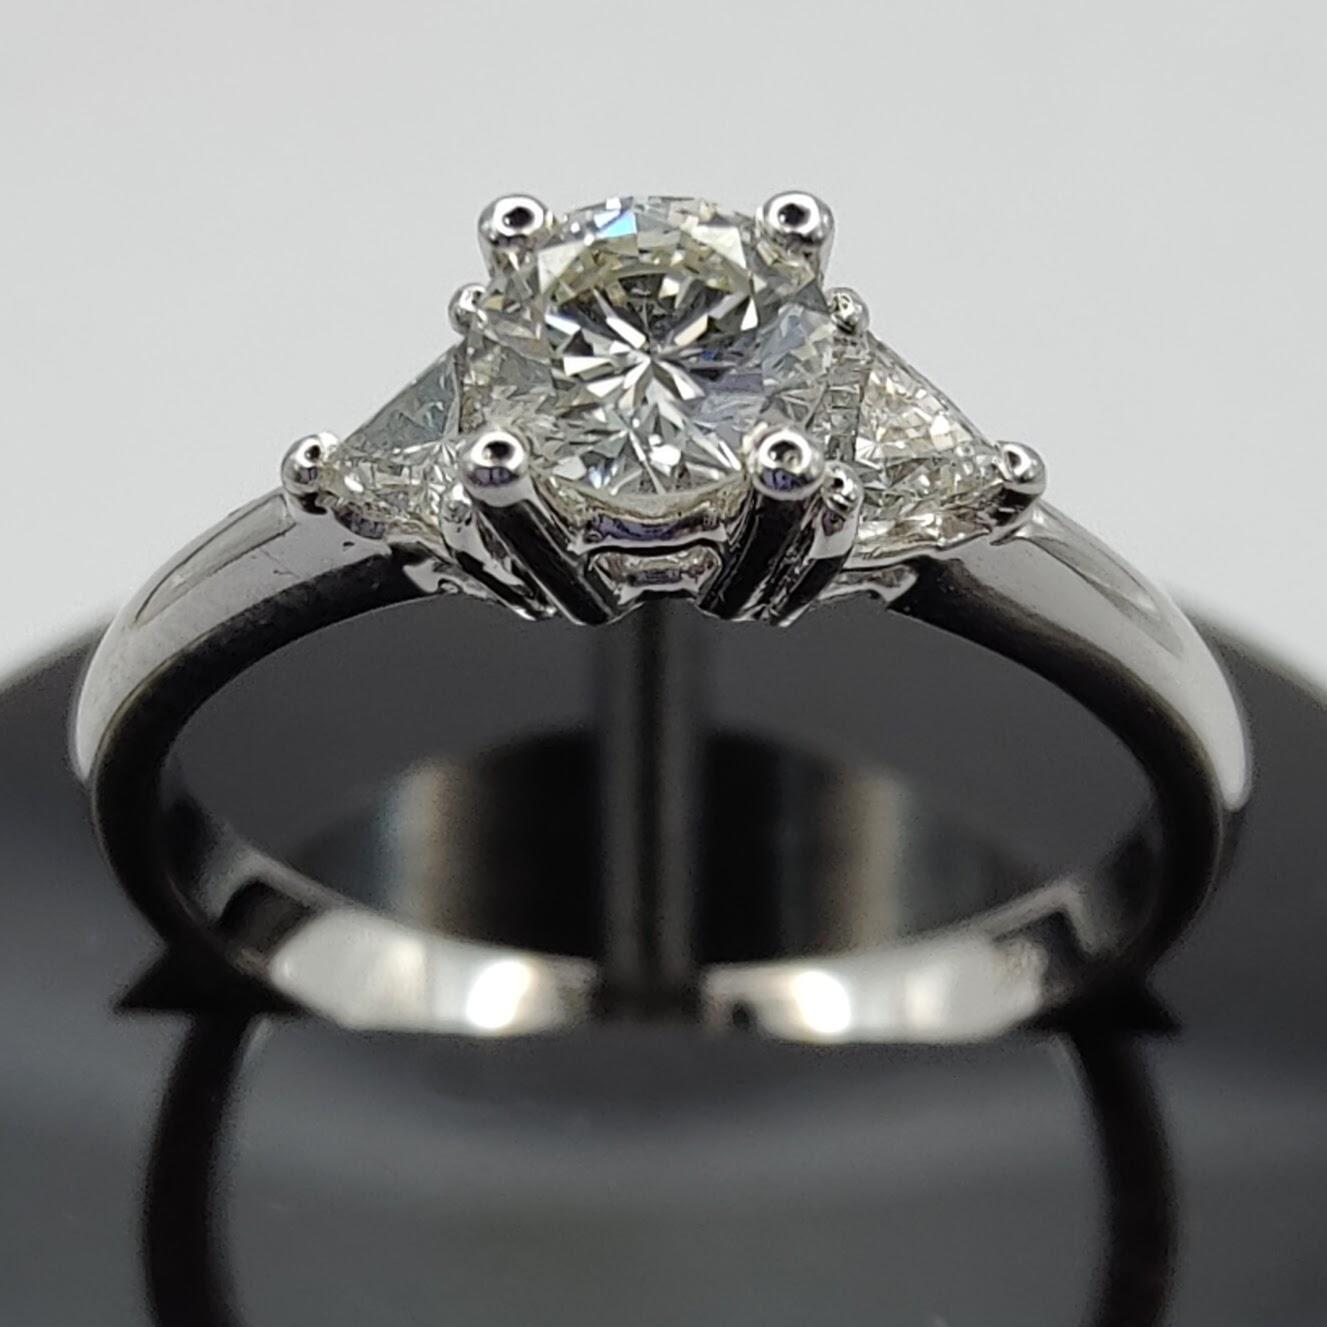 This three-stone diamond engagement ring is the epitome of timeless elegance and sophistication. The ring is made of 18k white gold, a material that is highly prized for its durability and shine. The white gold setting serves as the perfect backdrop